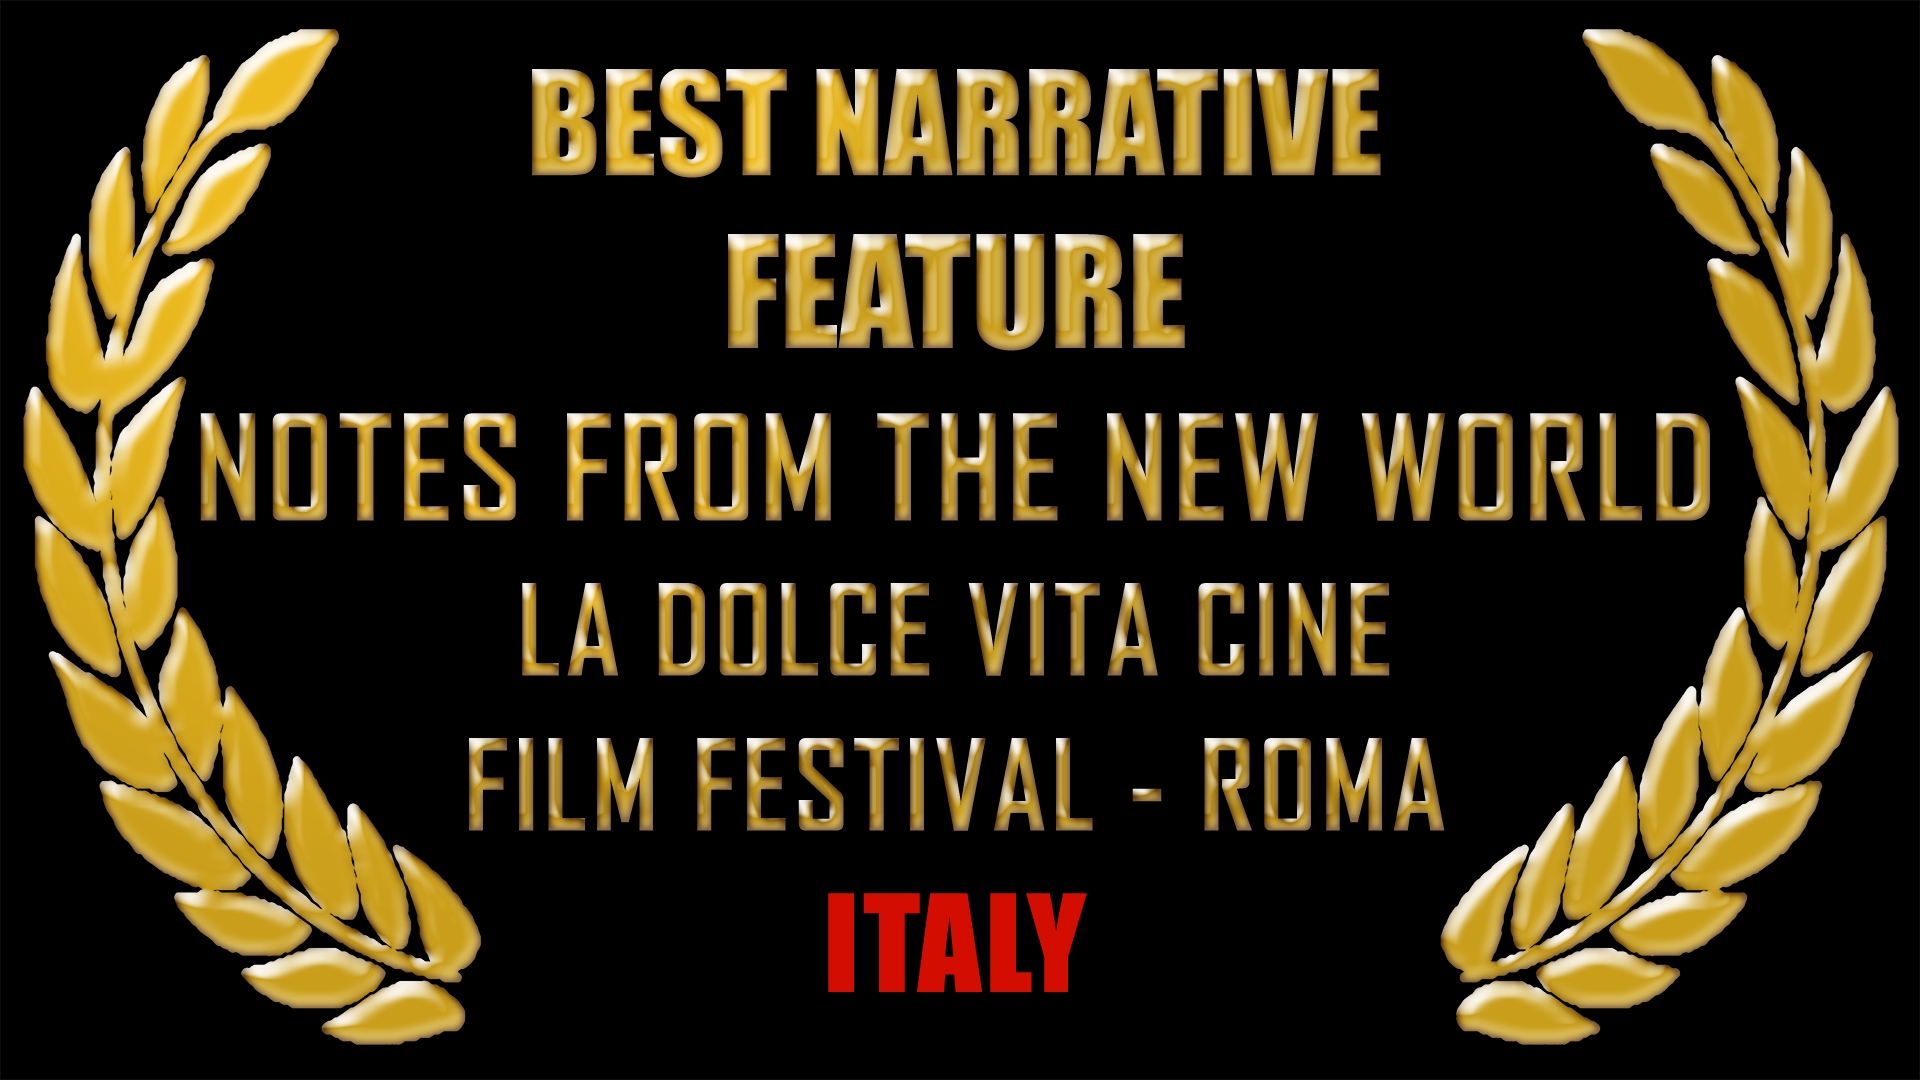 Best Narrative Feature, Italy